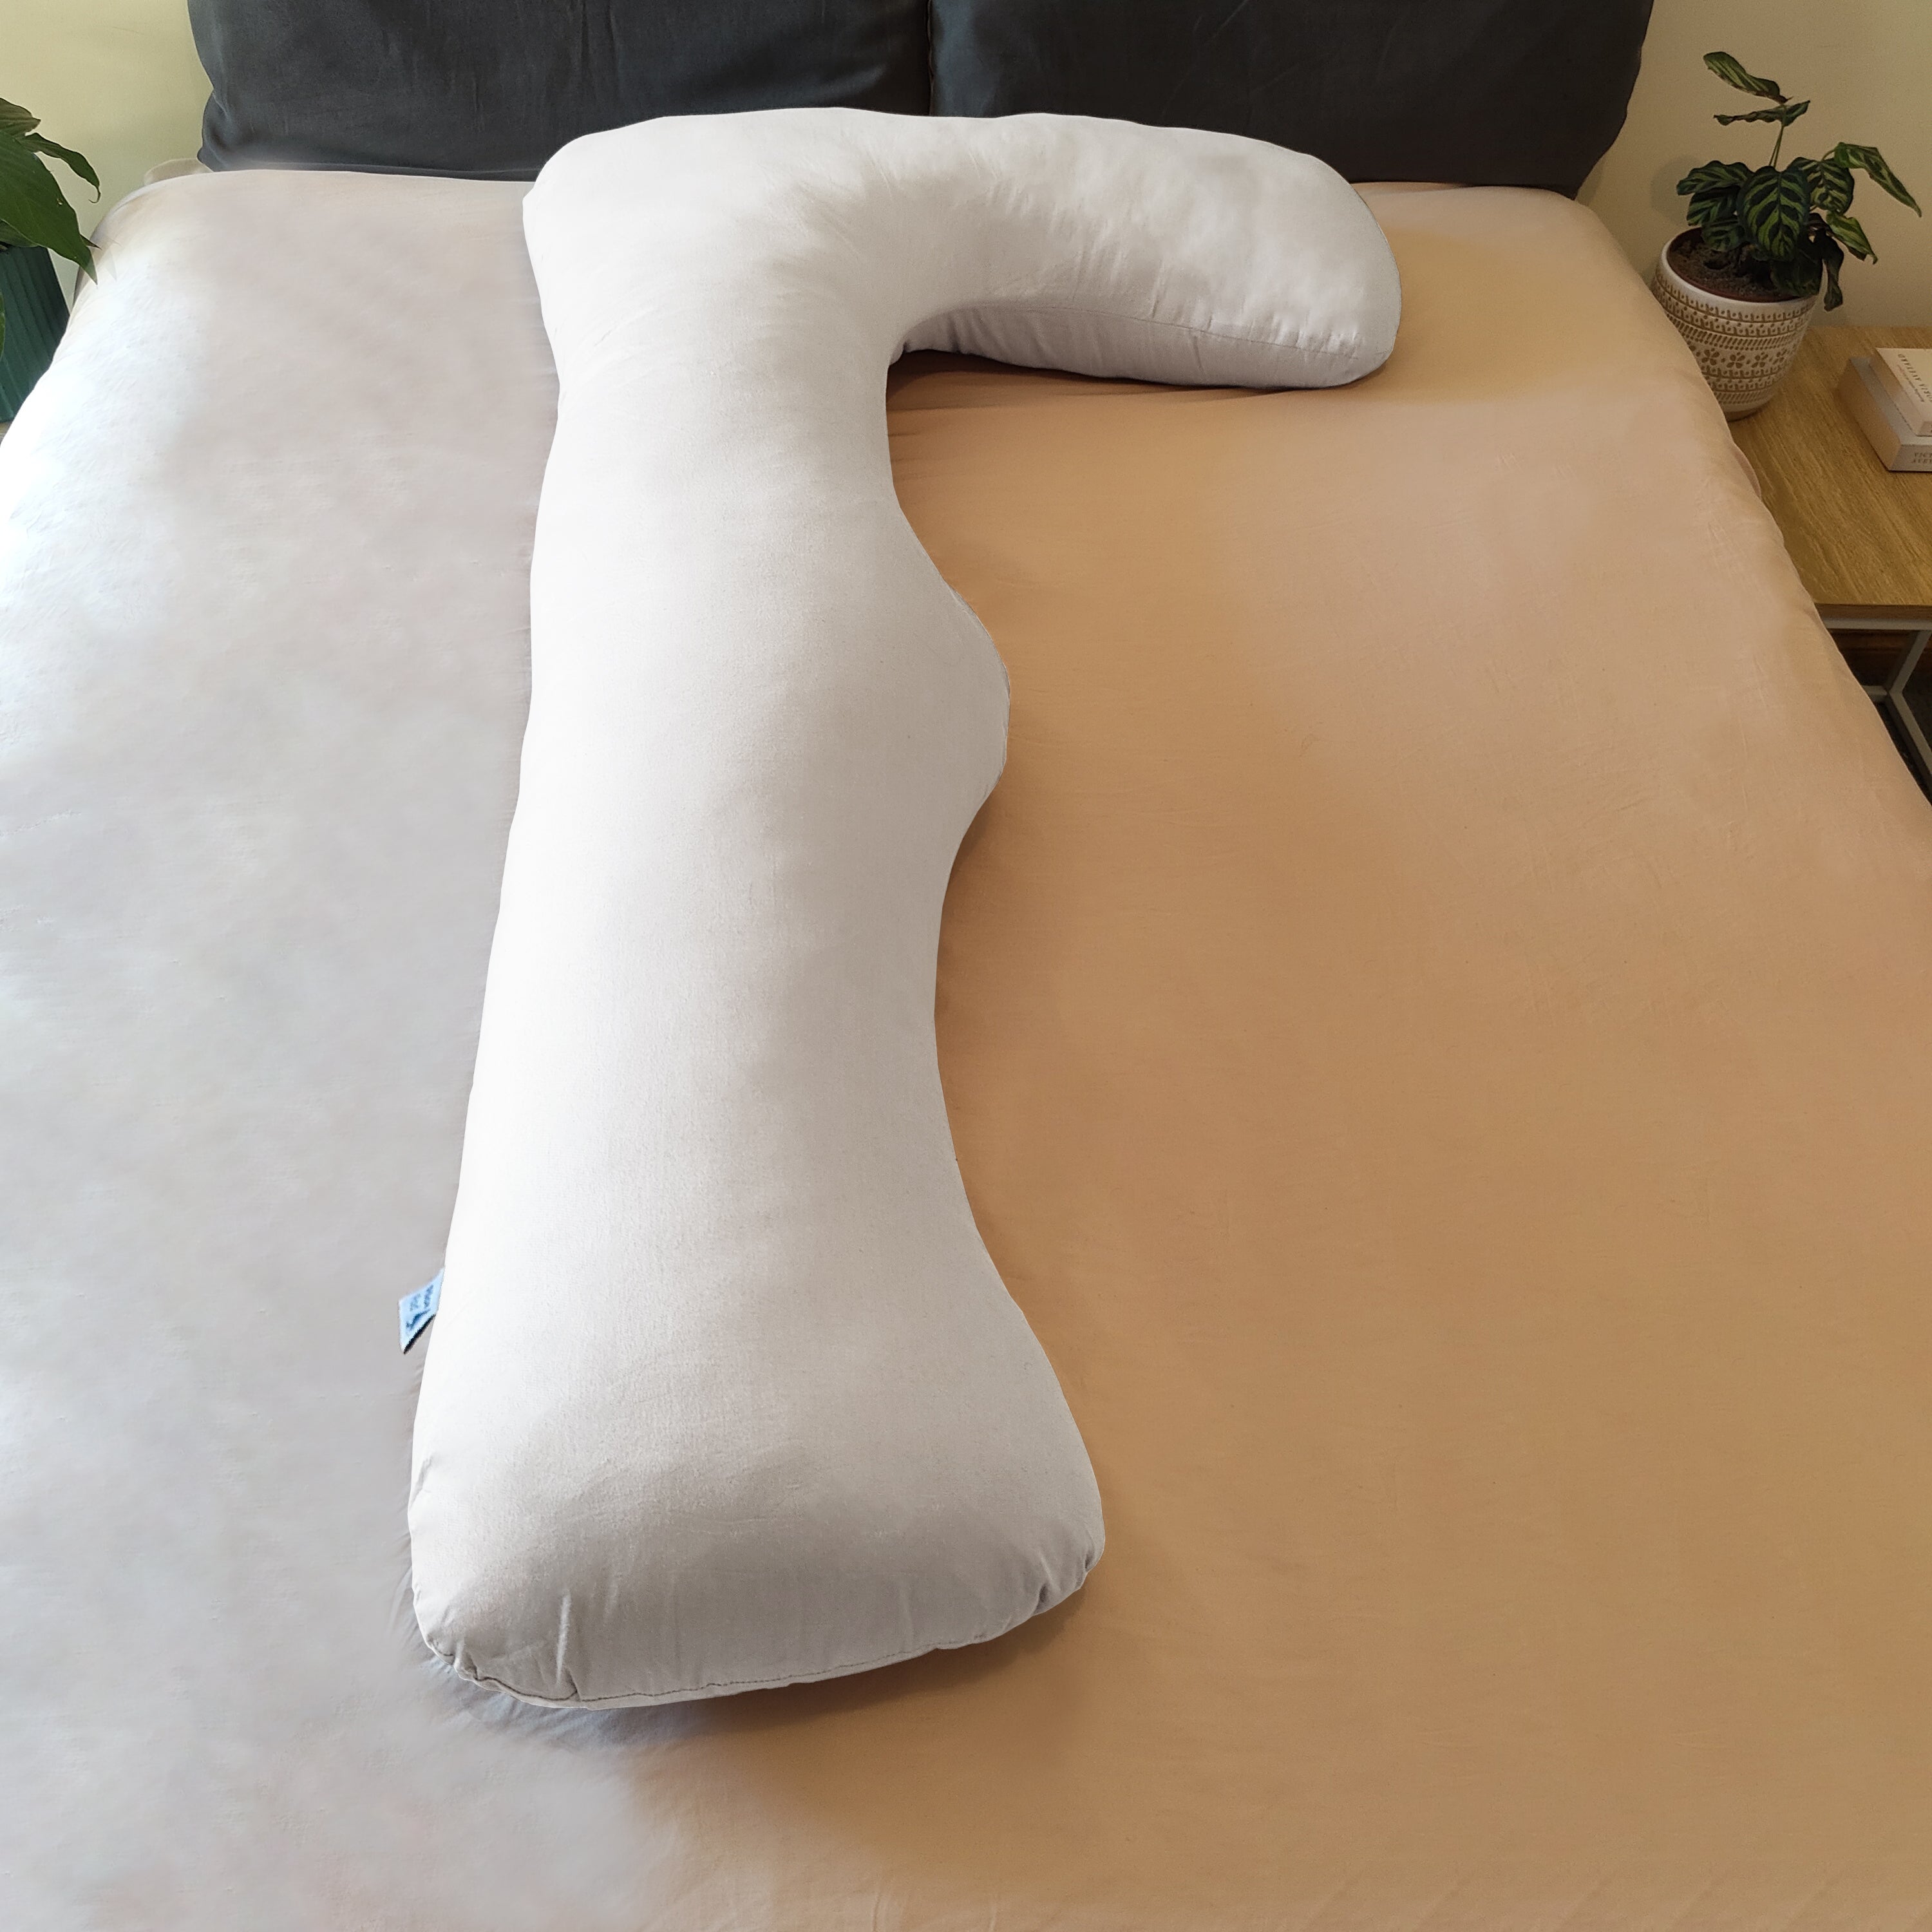 L-Shaped Support Pillow